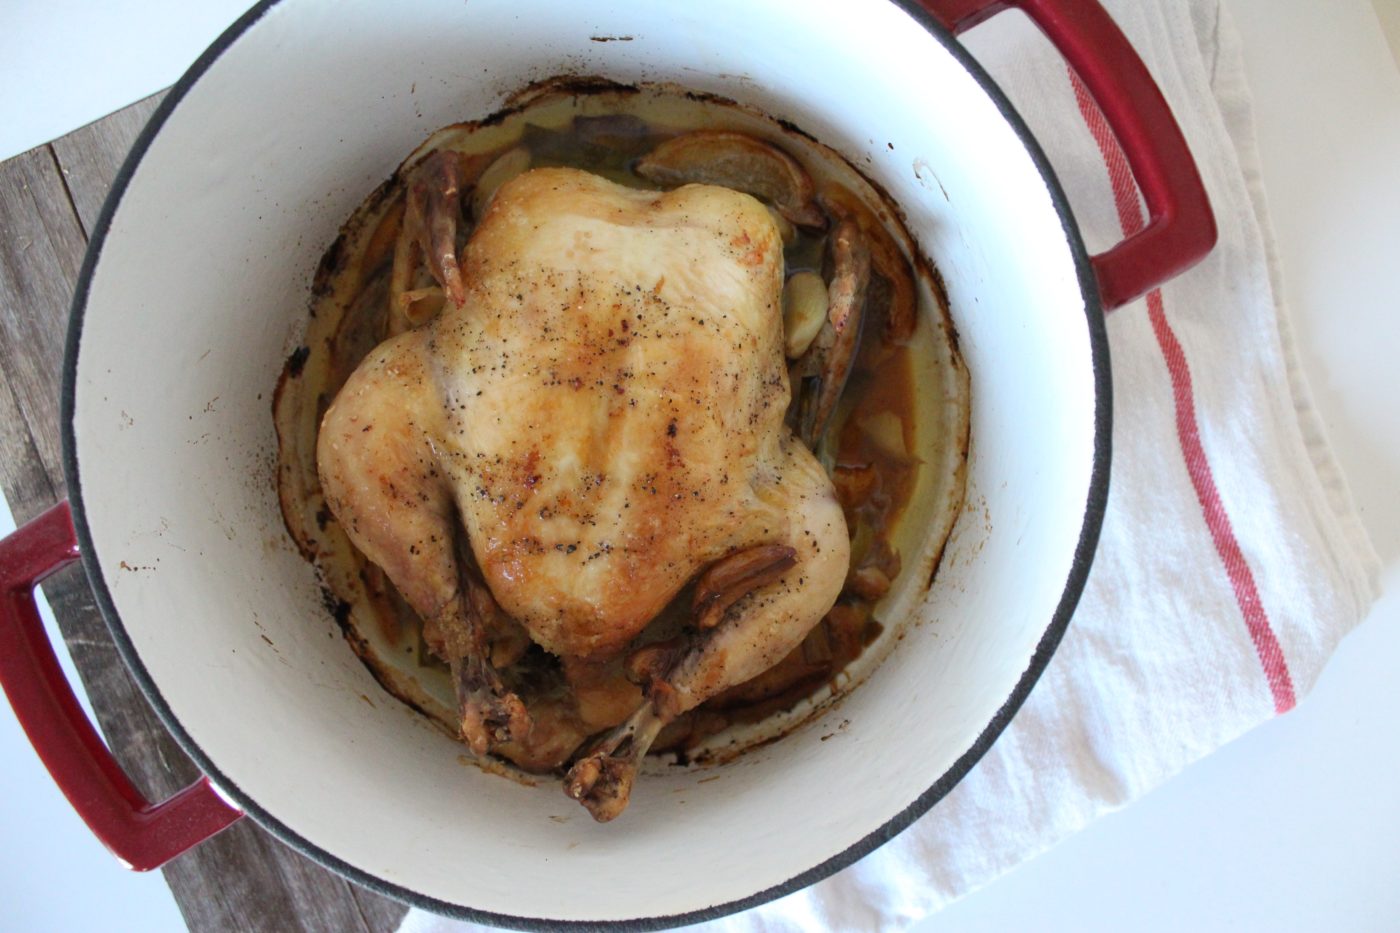 Bon Appetit provided an awesome guide for making the perfect slow roasted chicken. It's tender, easy to prepare and will impress your dinner guests.